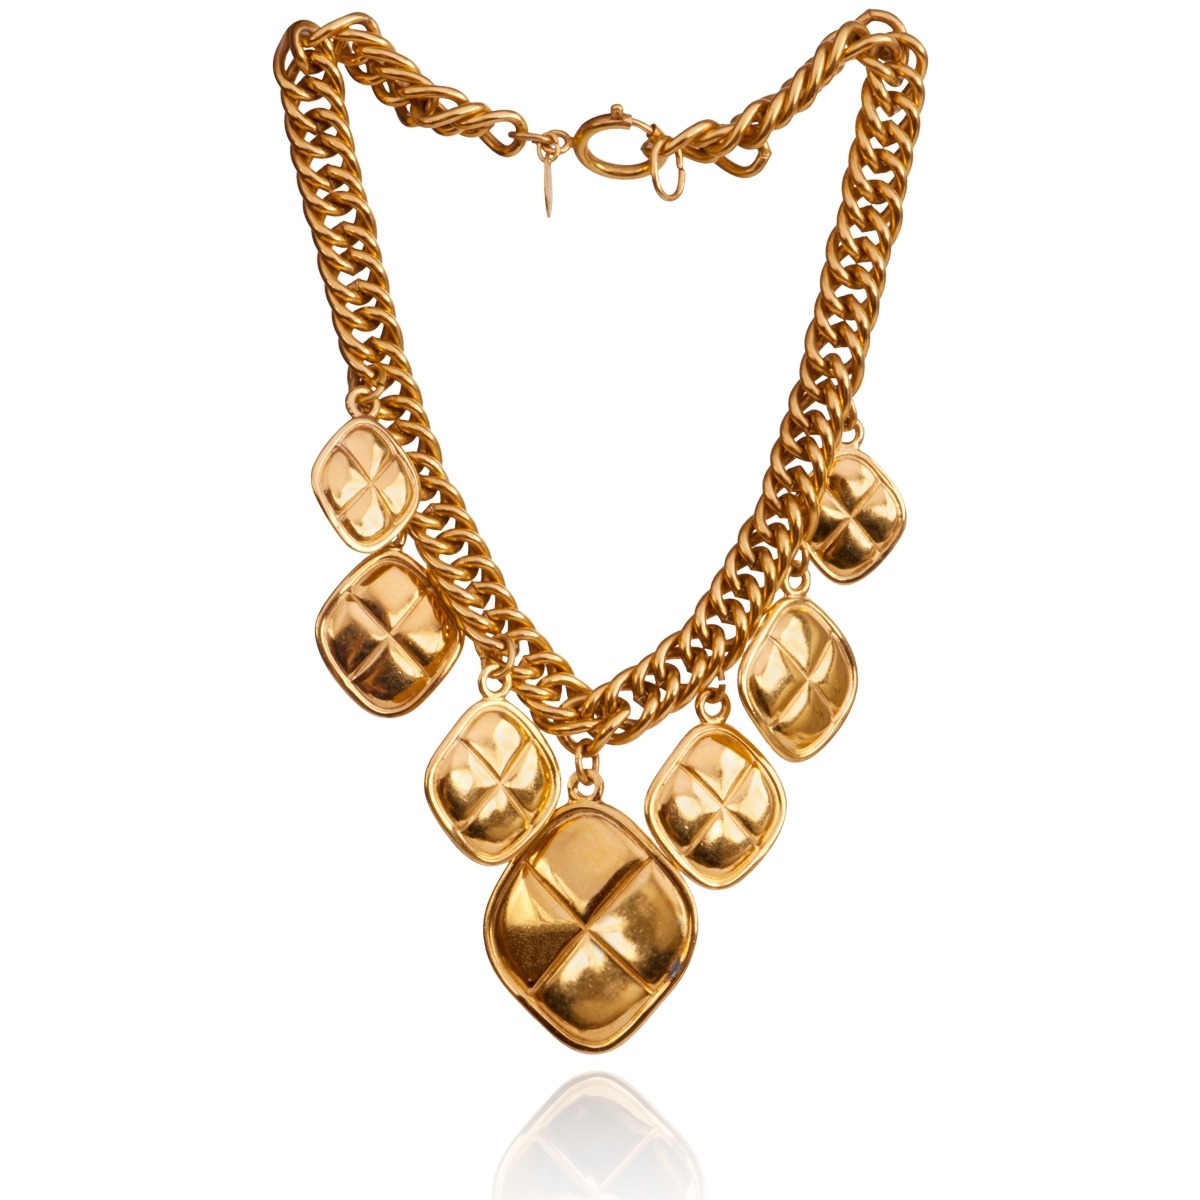 Chanel Charm Cold Chain Necklace - Formalist